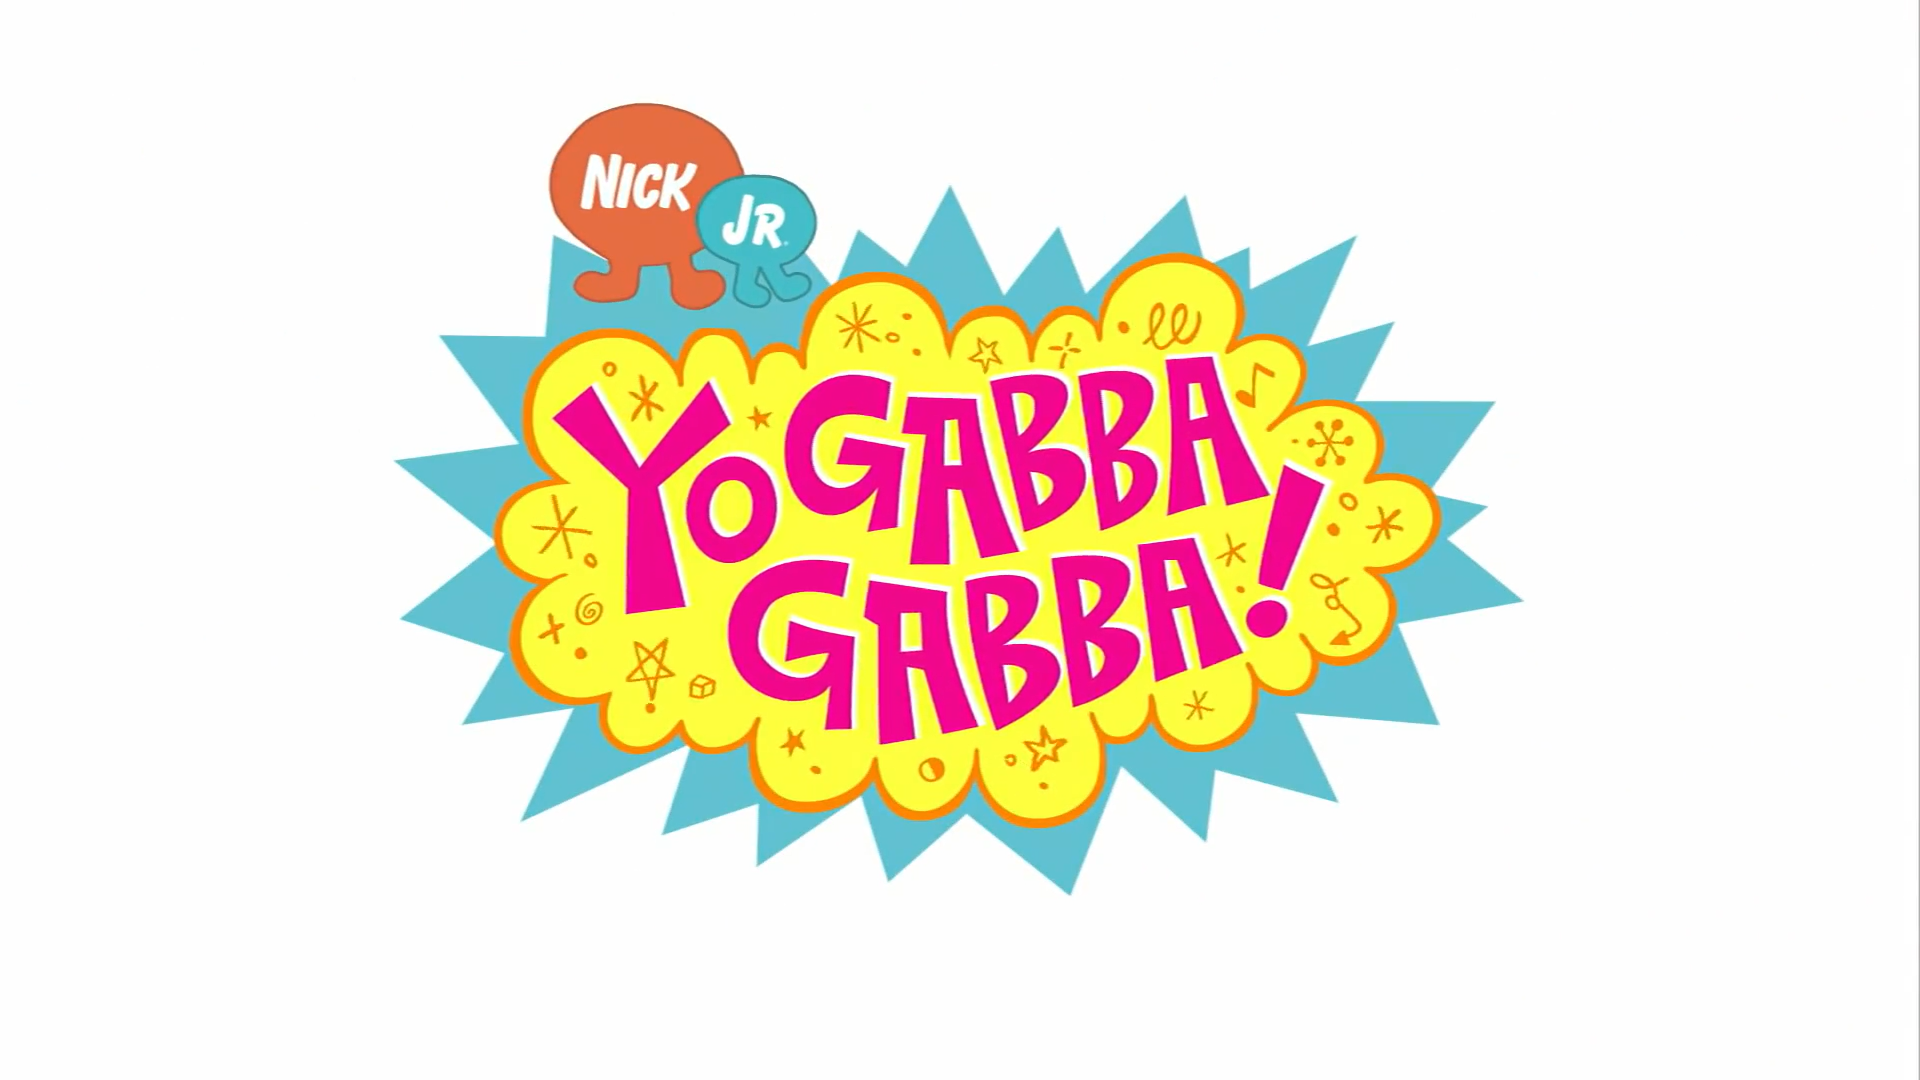 https://static.wikia.nocookie.net/nickelodeon/images/1/1a/Yo_Gabba_Gabba%21_Title_Card.png/revision/latest?cb=20230506124050